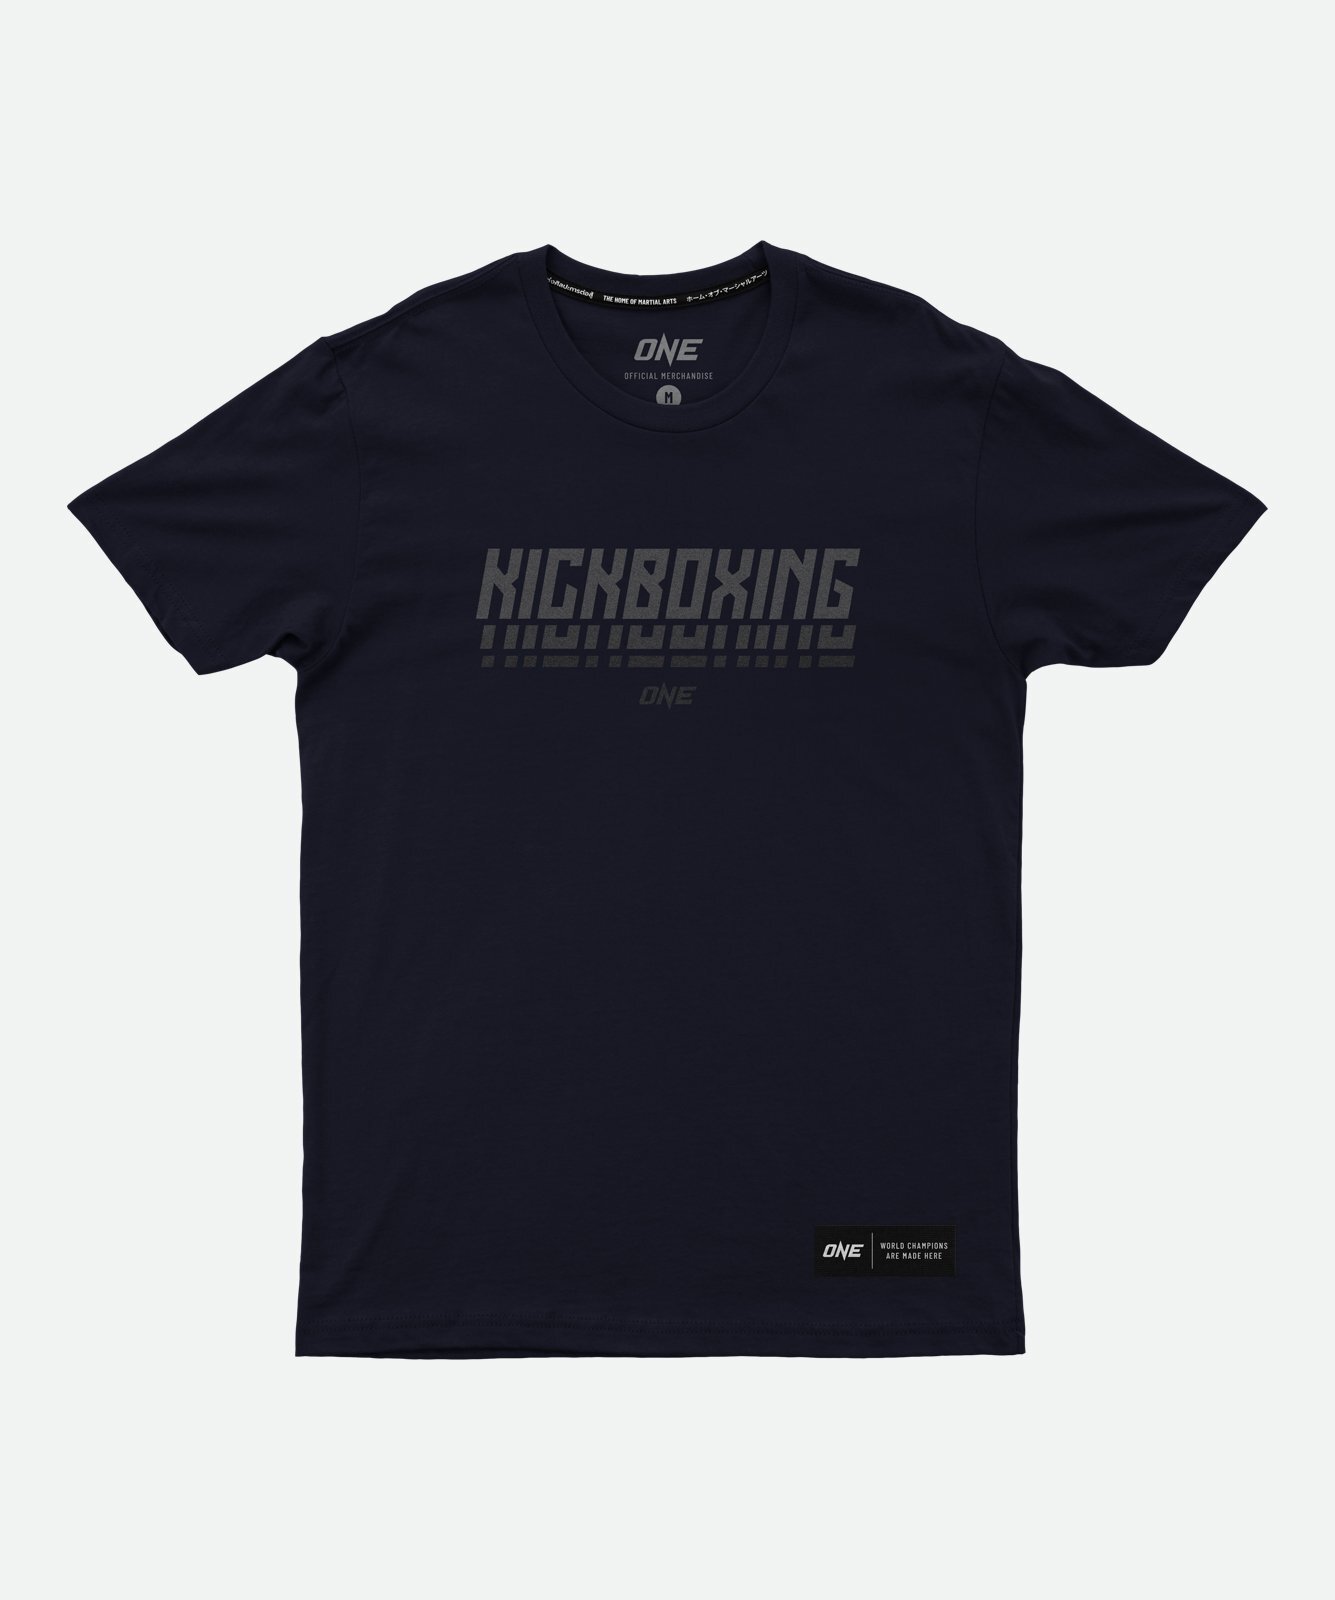 ONE Kickboxing Typography Tee - Extra Small